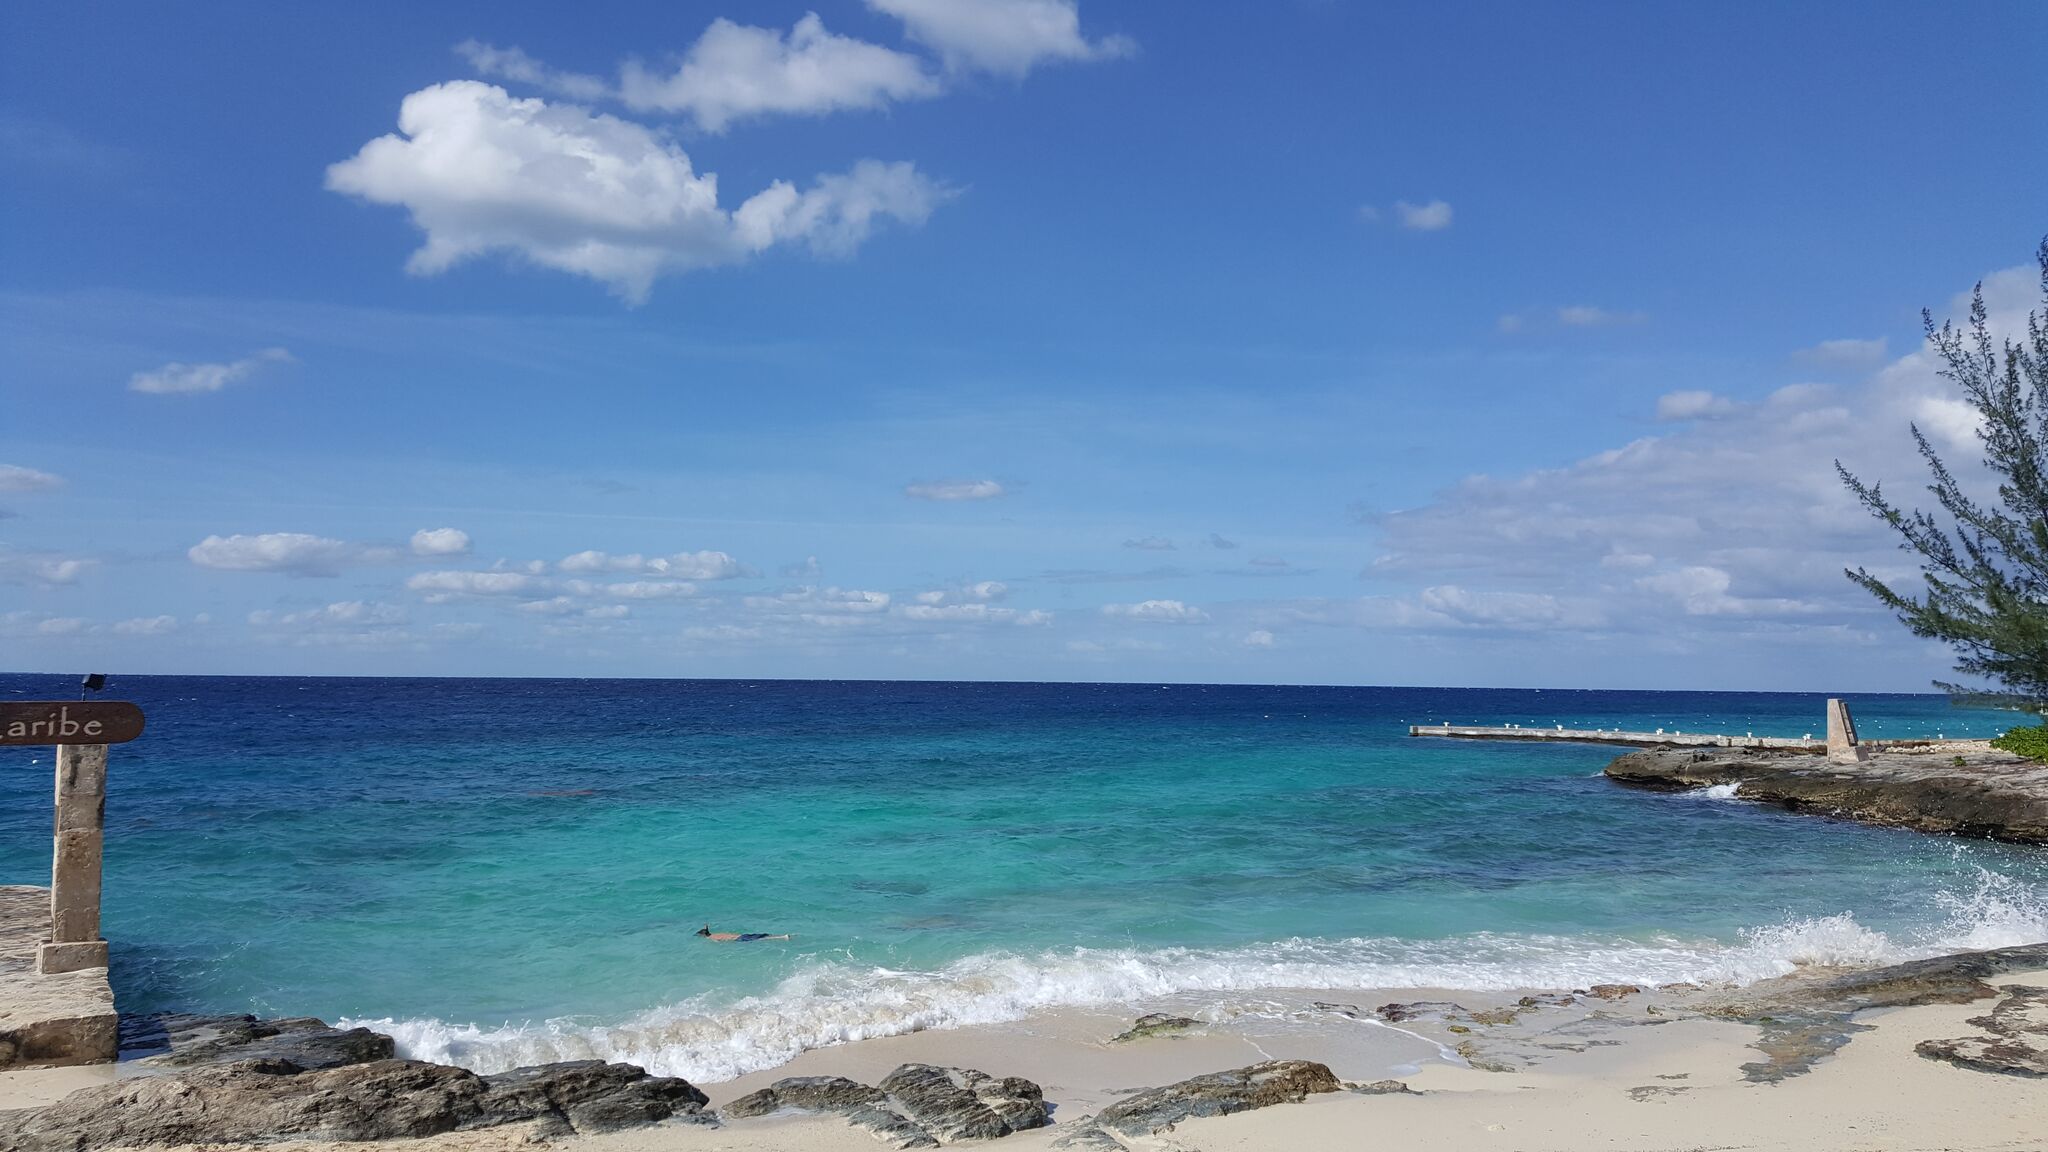 My New Find In Cozumel: Buccanos - Travel With Sara